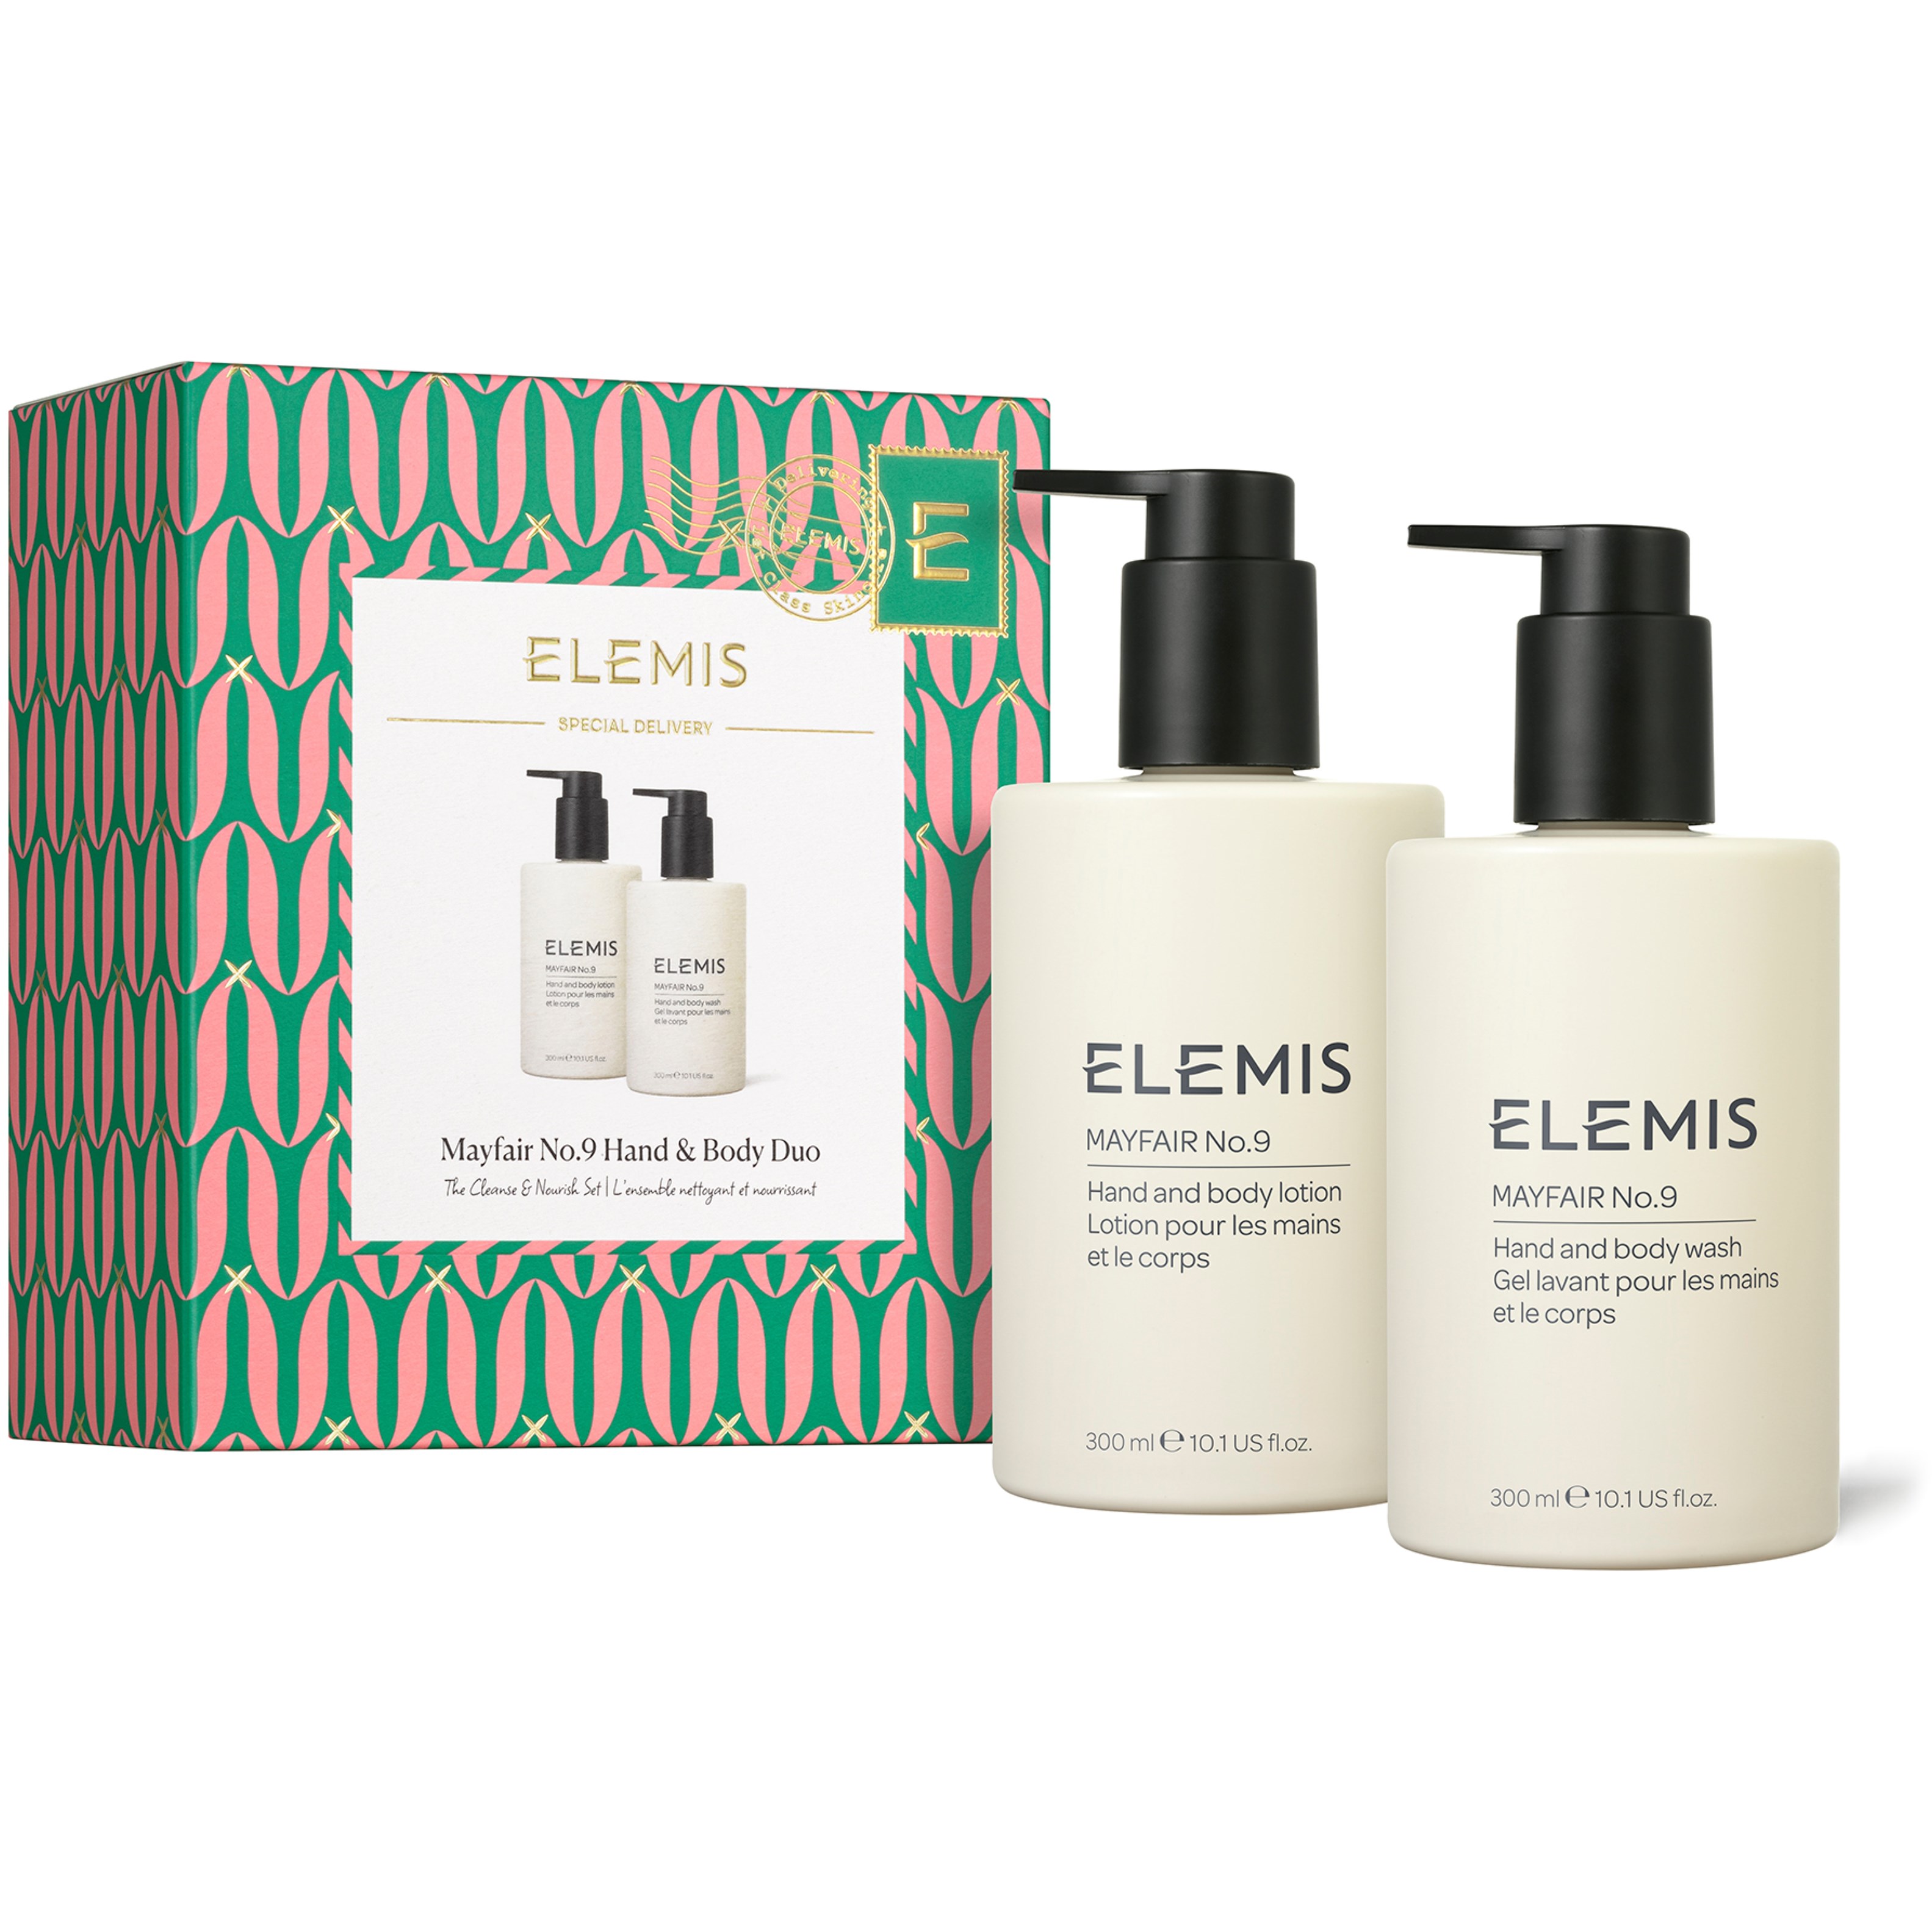 Elemis Mayfair No9 Hand and Body Duo